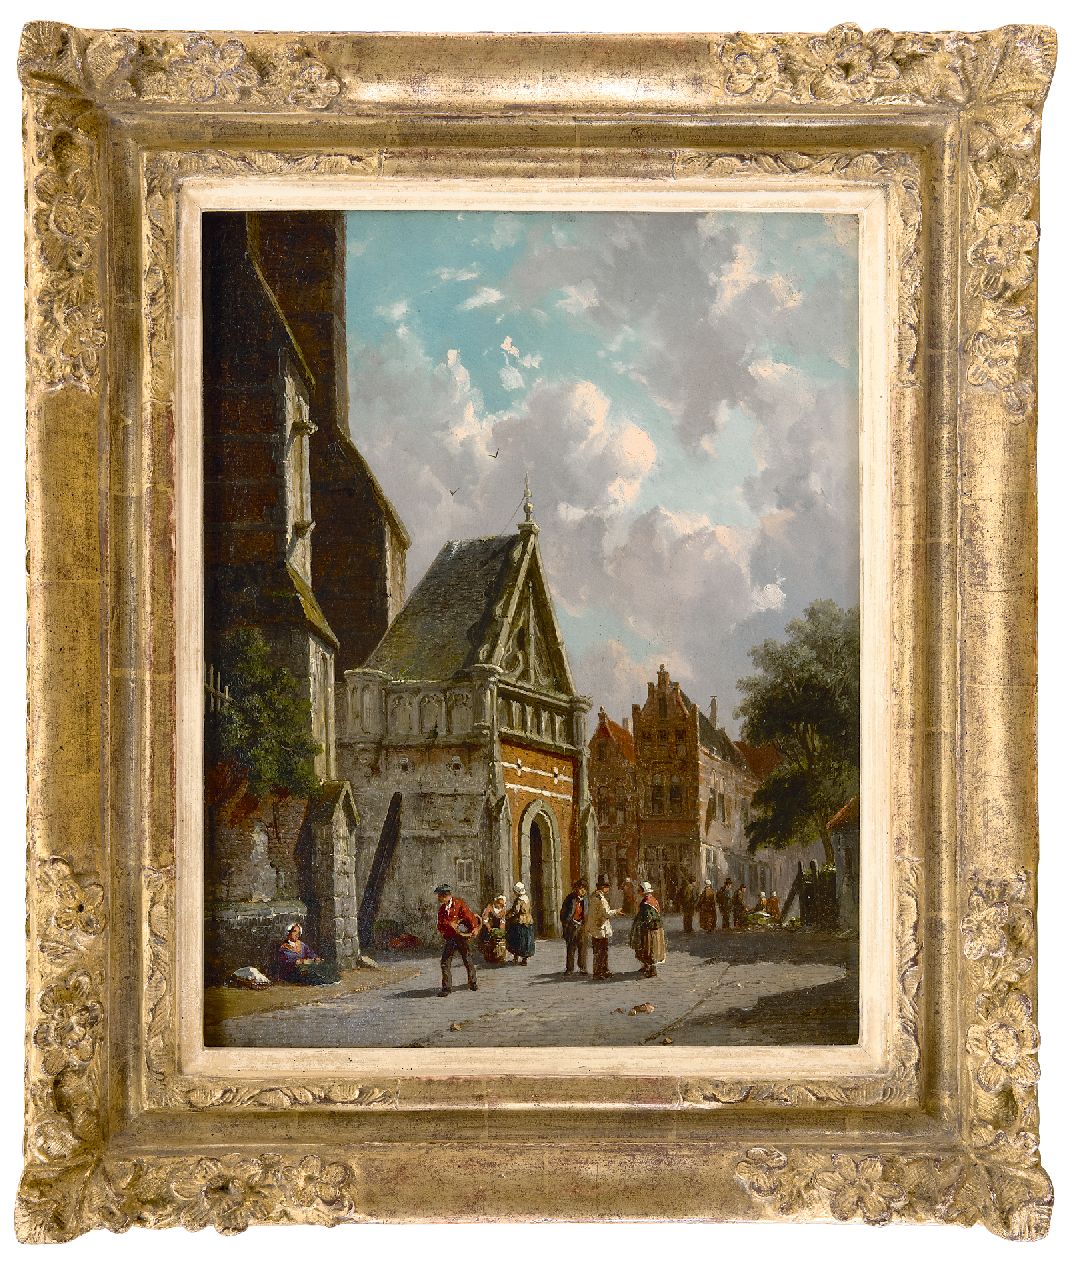 Eversen A.  | Adrianus Eversen | Paintings offered for sale | Behind the church, oil on panel 34.8 x 27.0 cm, signed l.r.